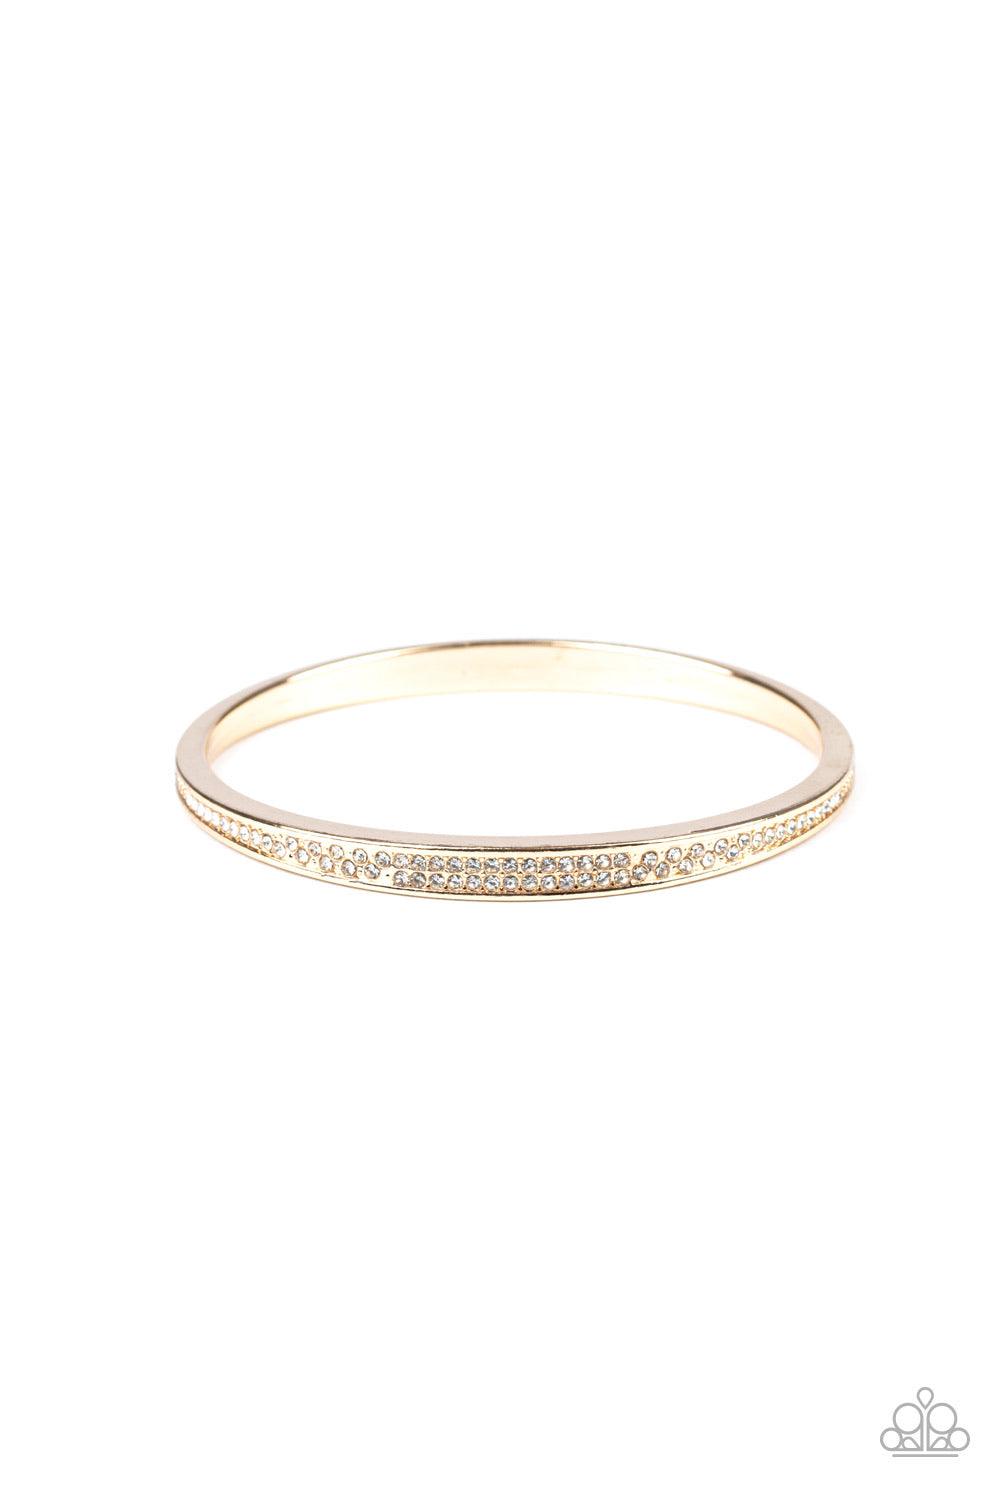 Paparazzi Accessories Power Move - Gold Rows of dainty white rhinestones have been encrusted along the front of a thick asymmetrical gold bangle for a timeless twist. Sold as one individual bracelet. Jewelry